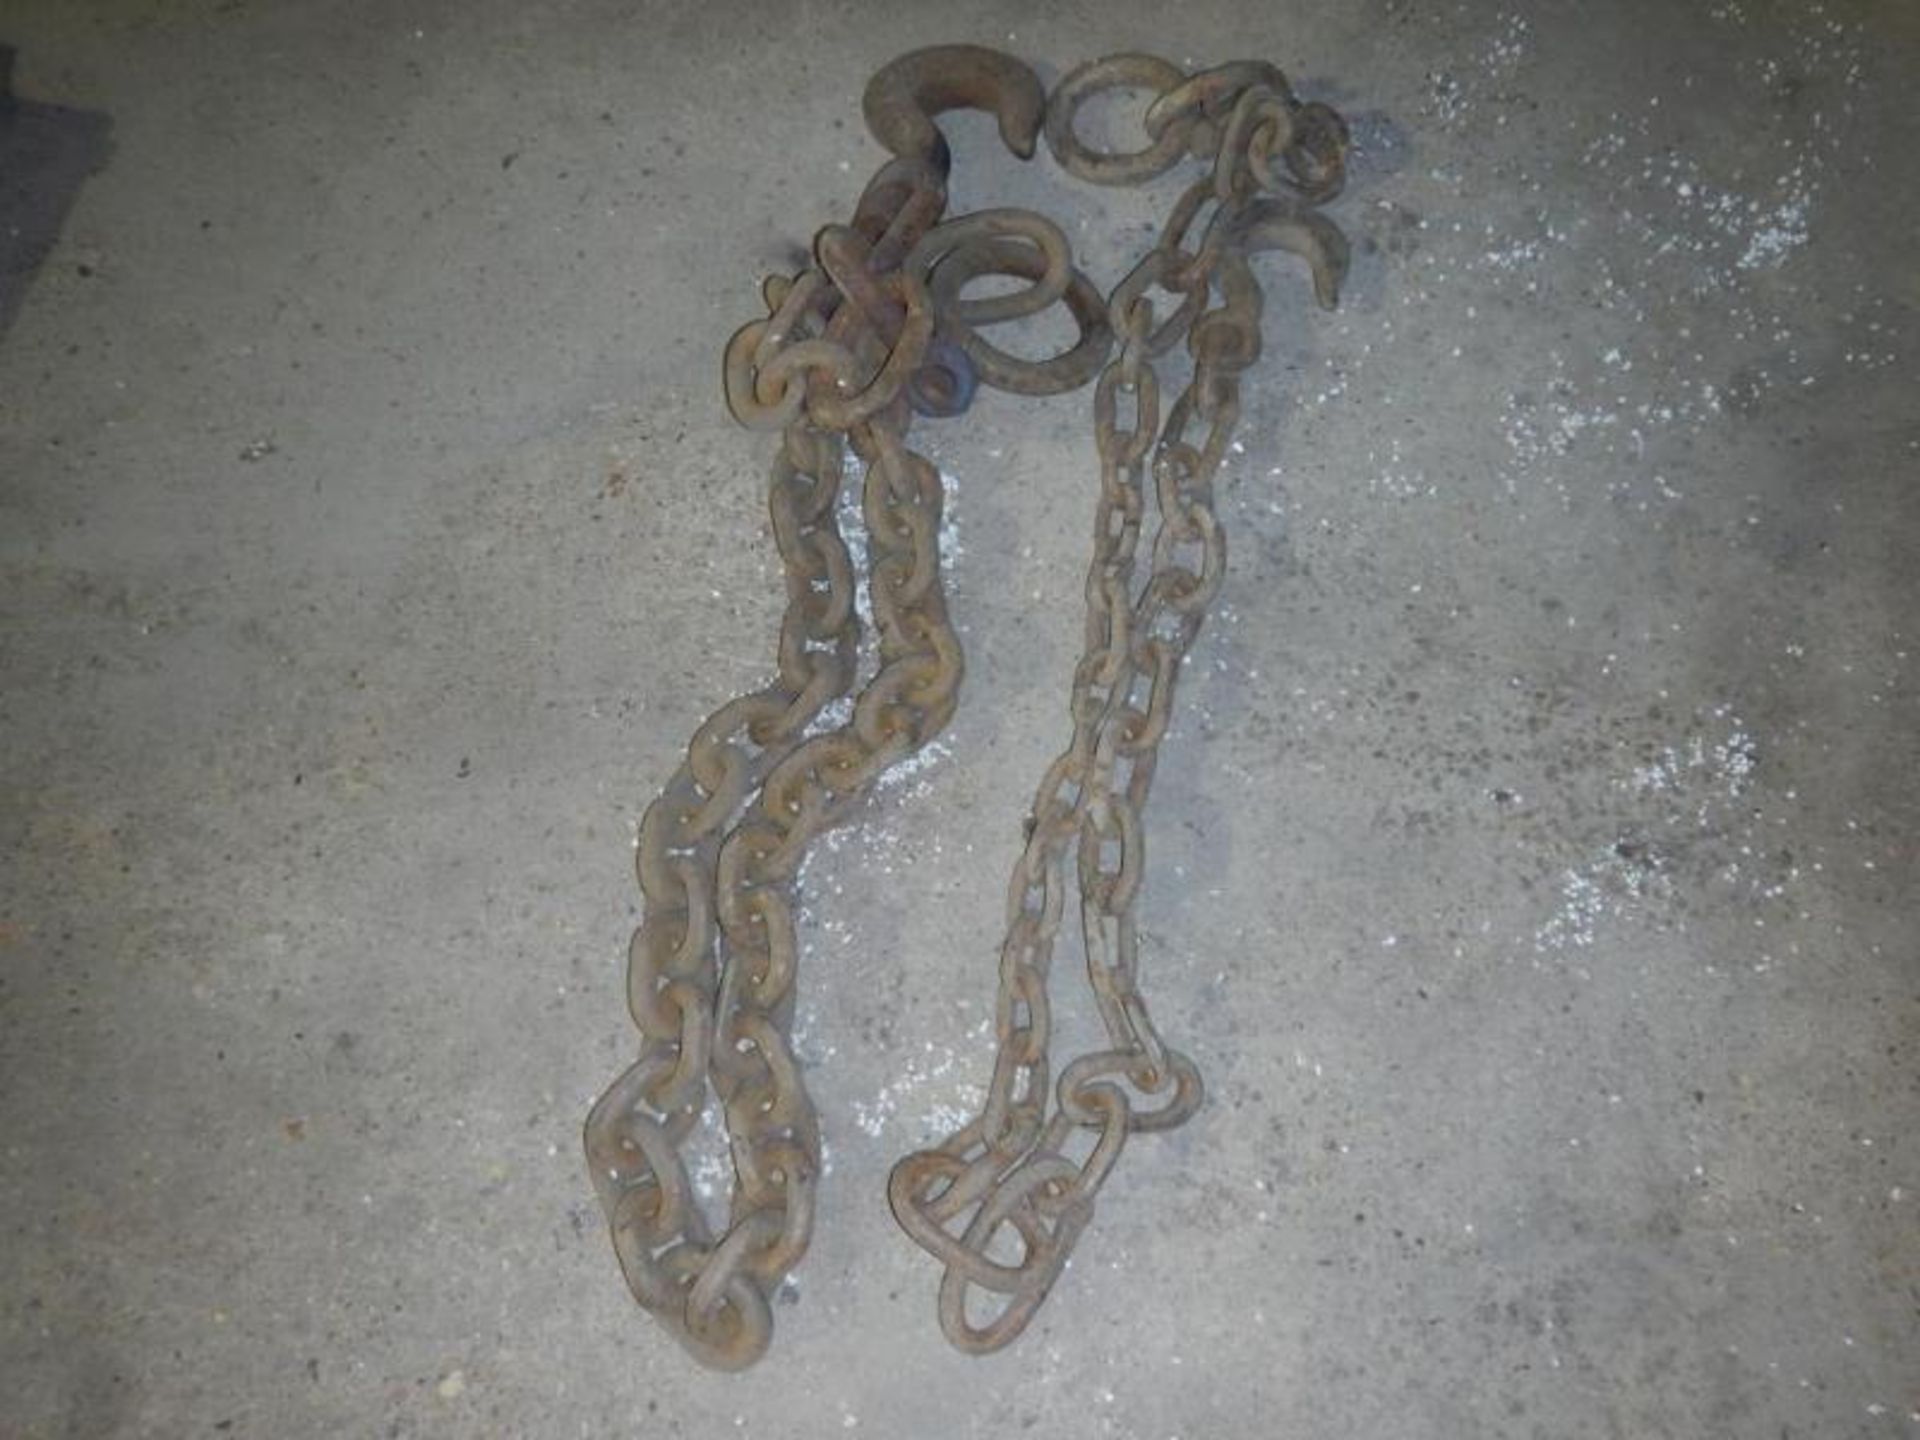 2no. heavy duty tow chains